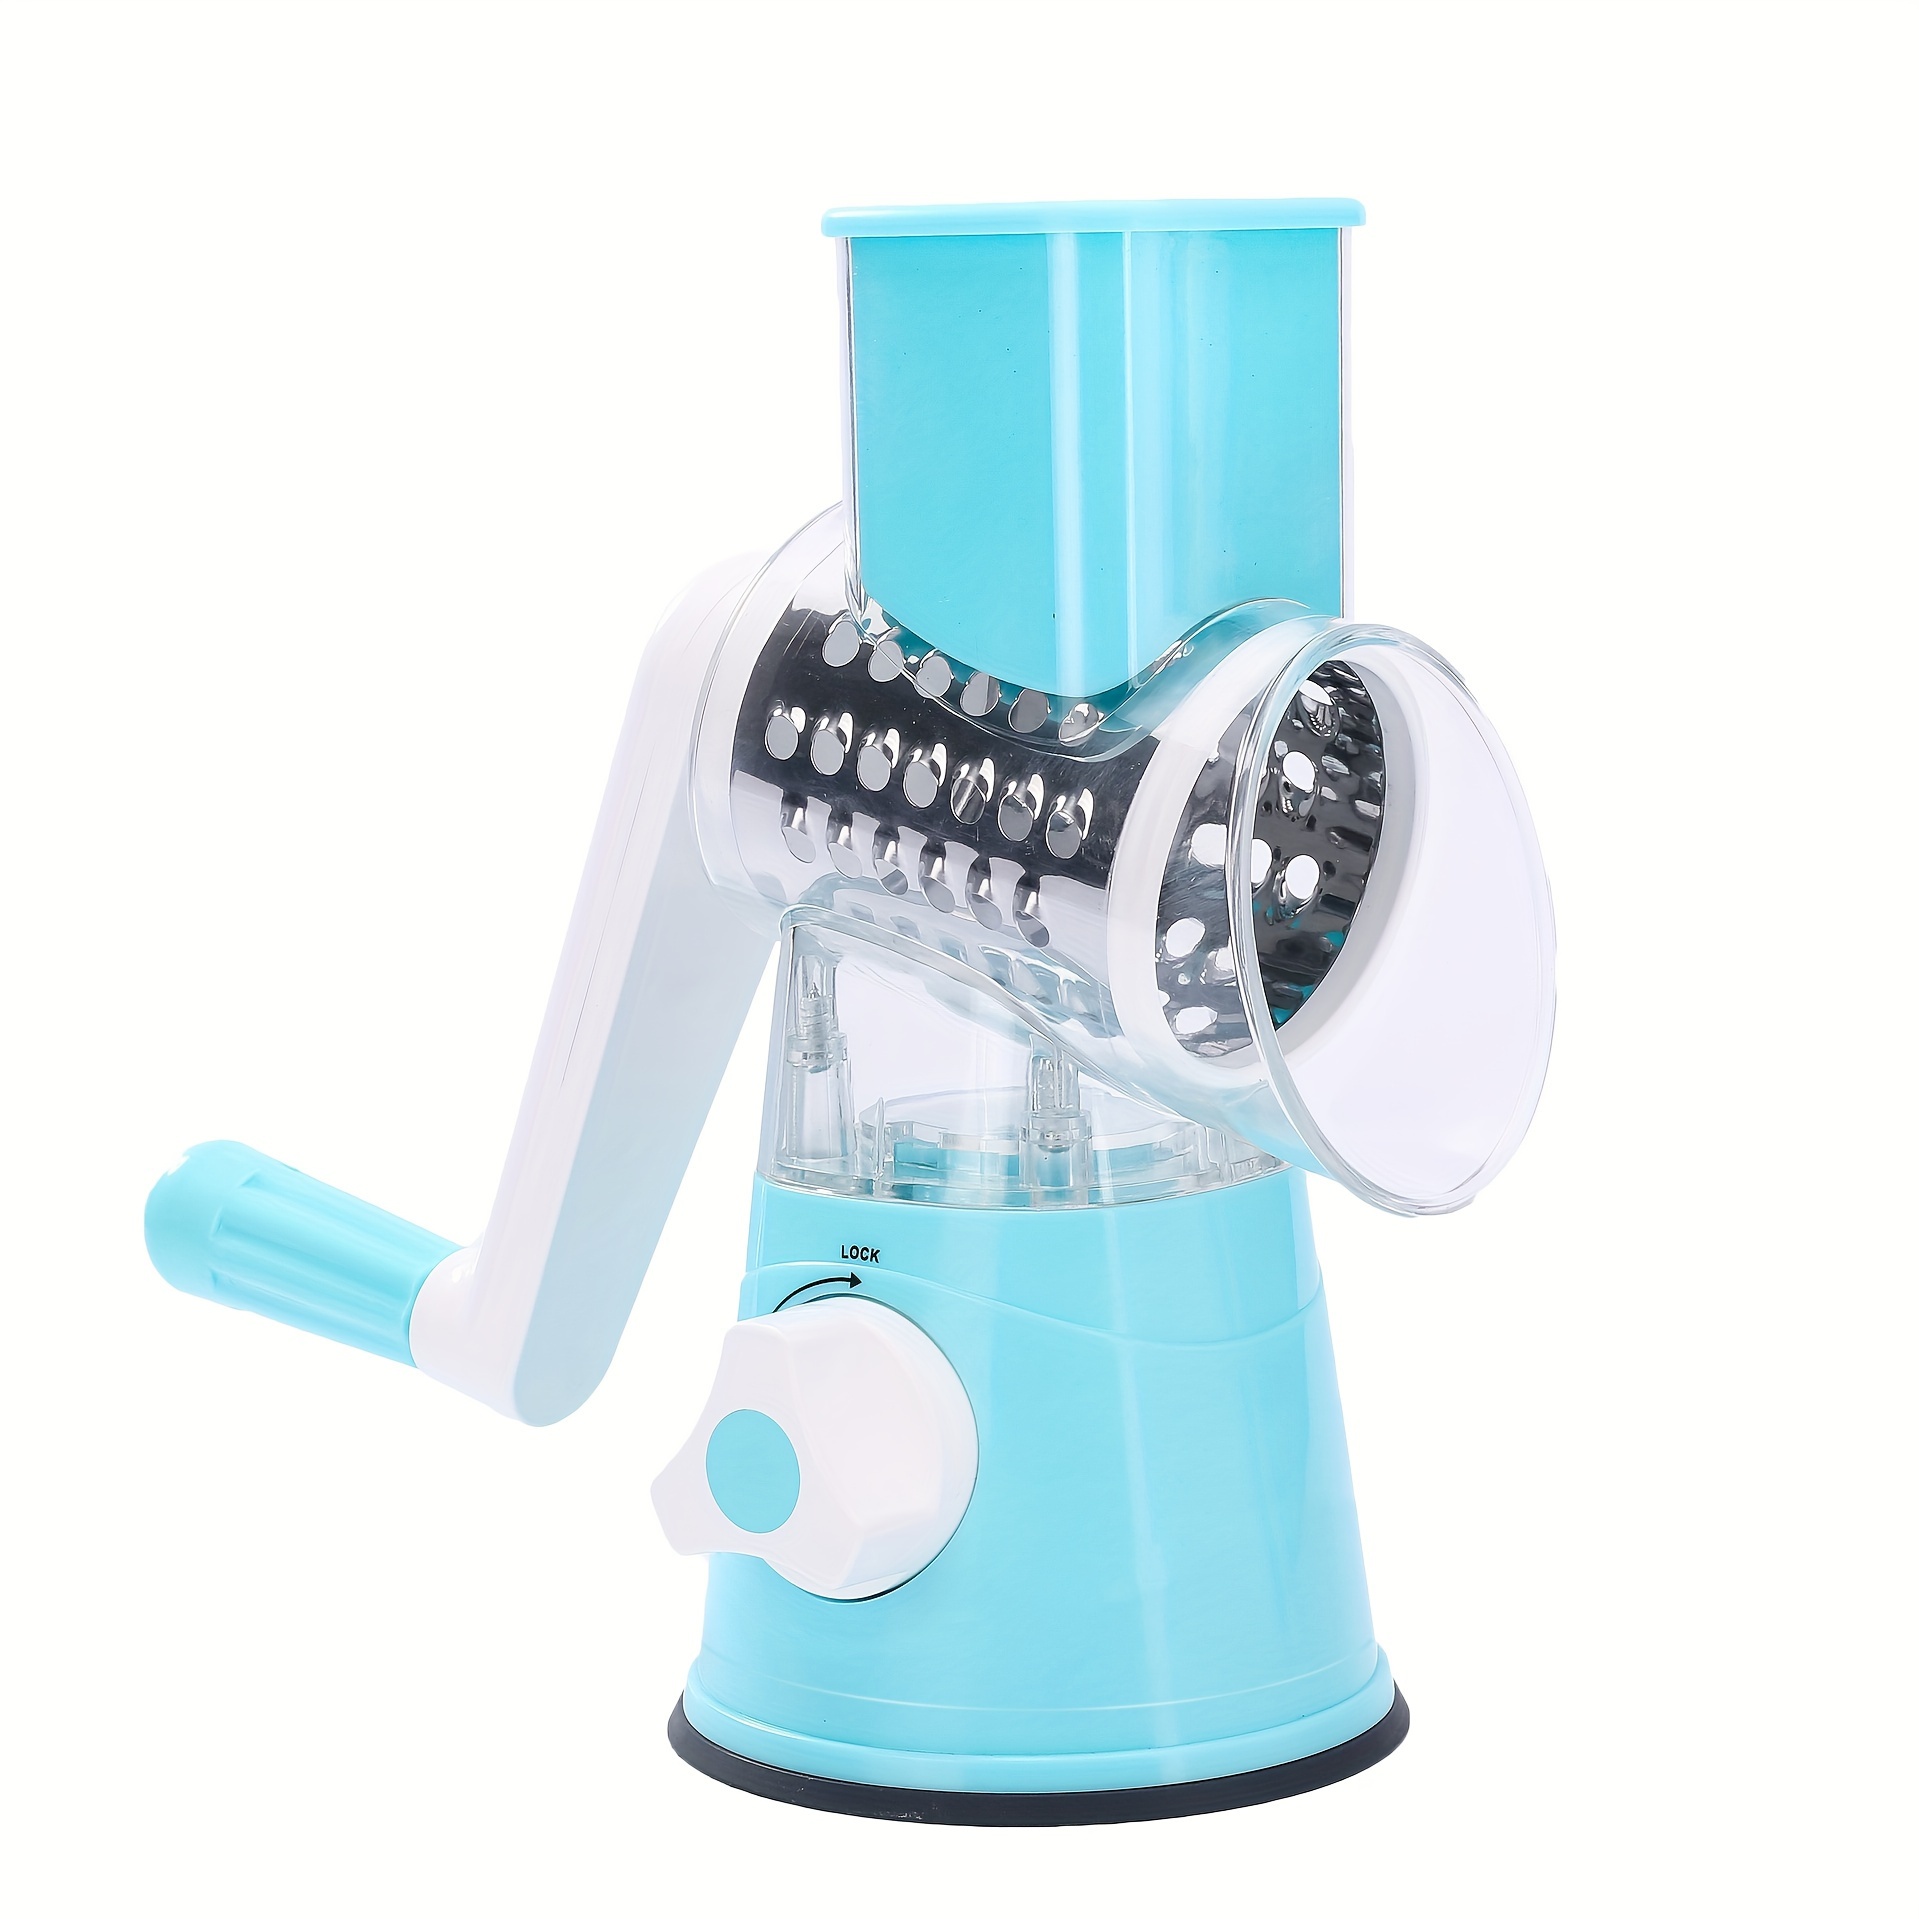 Rotary Cheese Grater Shredder Chopper Round Tumbling Box Mandoline Slicer  Nut Grinder Vegetable Slicer, Hash Brown, Potato with Strong Suction